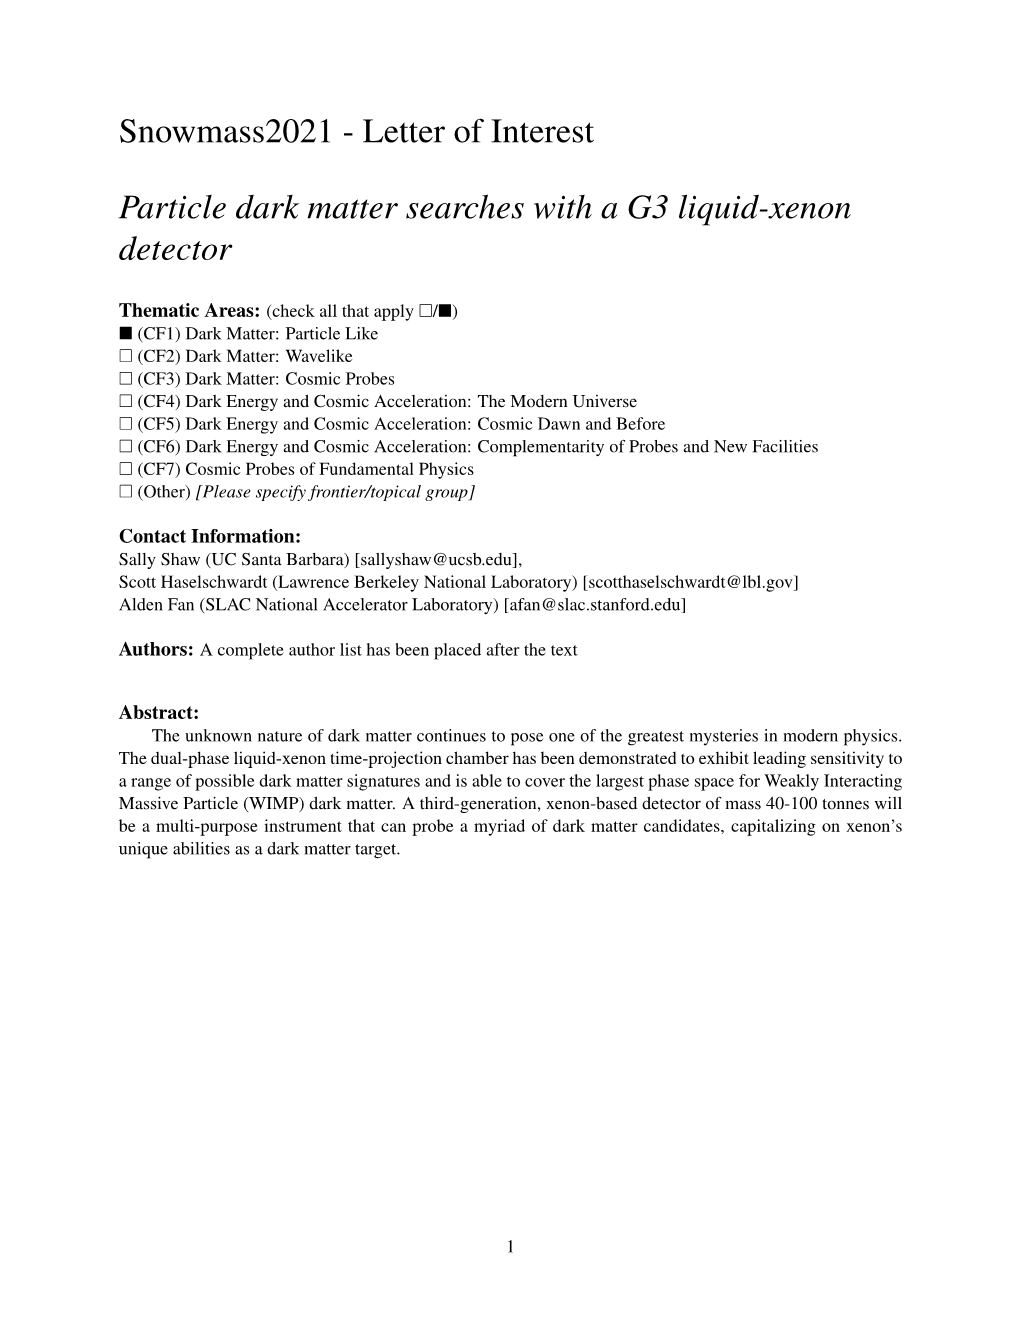 Letter of Interest Particle Dark Matter Searches with a G3 Liquid-Xenon